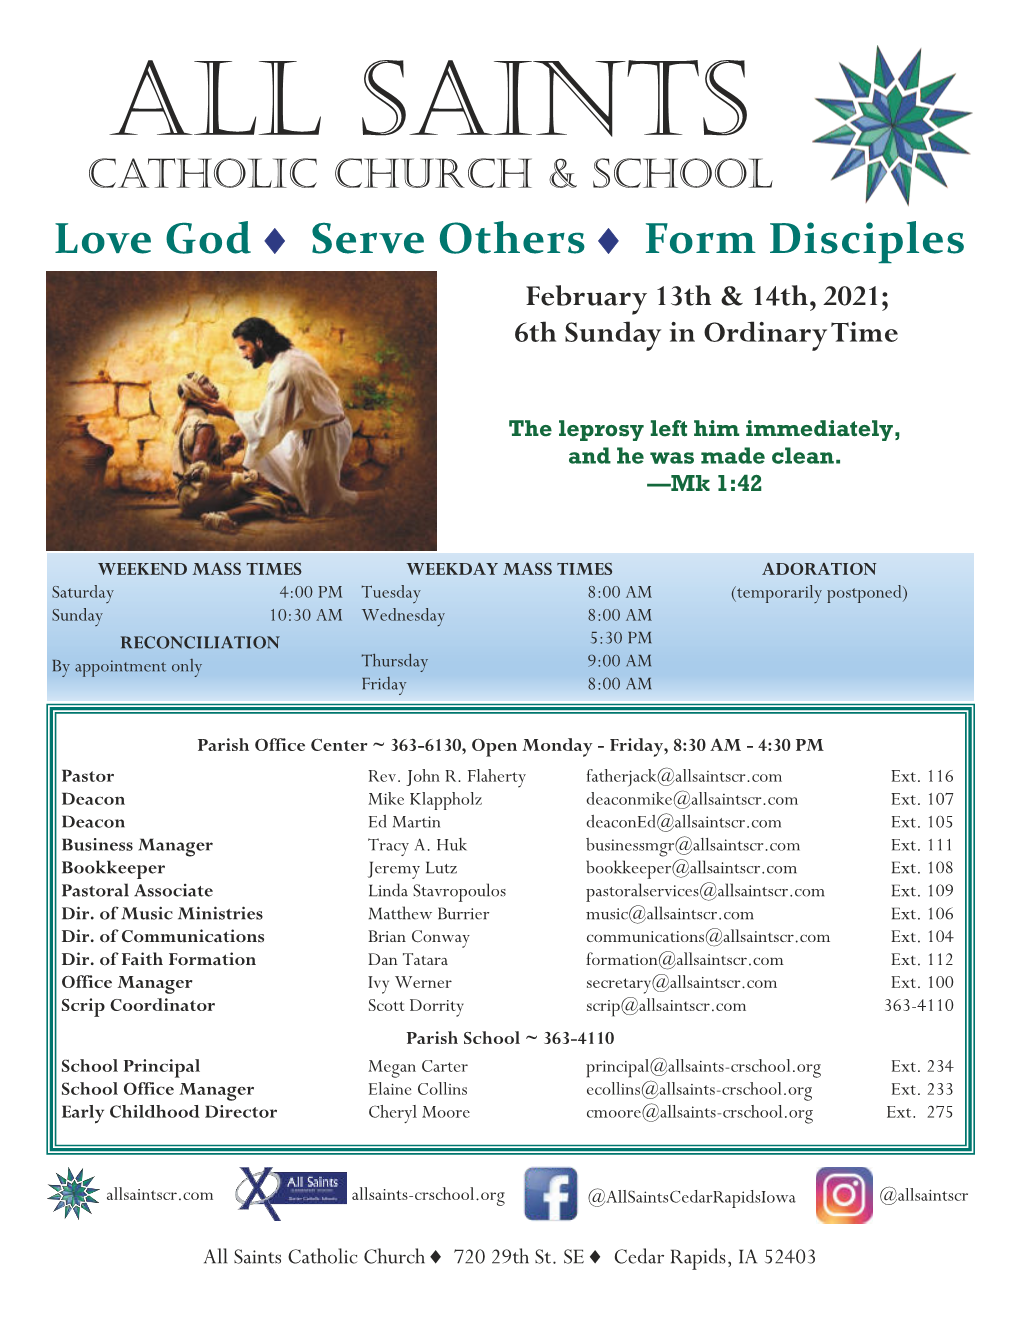 All Saints Catholic Church & School Love God  Serve Others  Form Disciples February 13Th & 14Th, 2021; 6Th Sunday in Ordinary Time